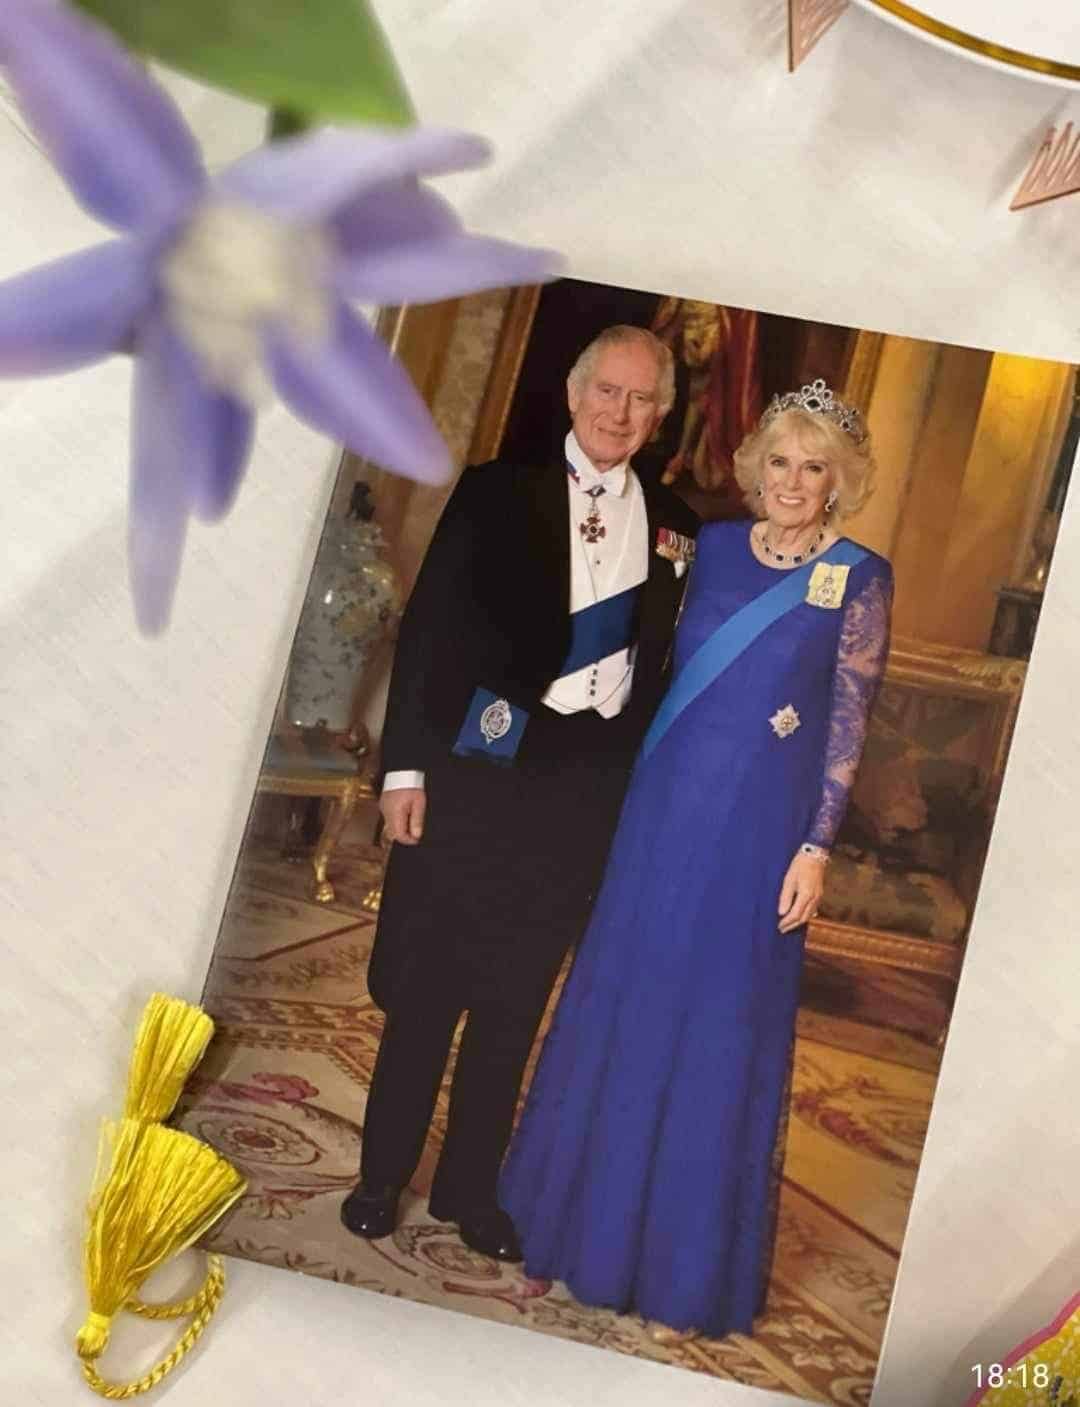 Peggy's card from King Charles and Queen Camilla